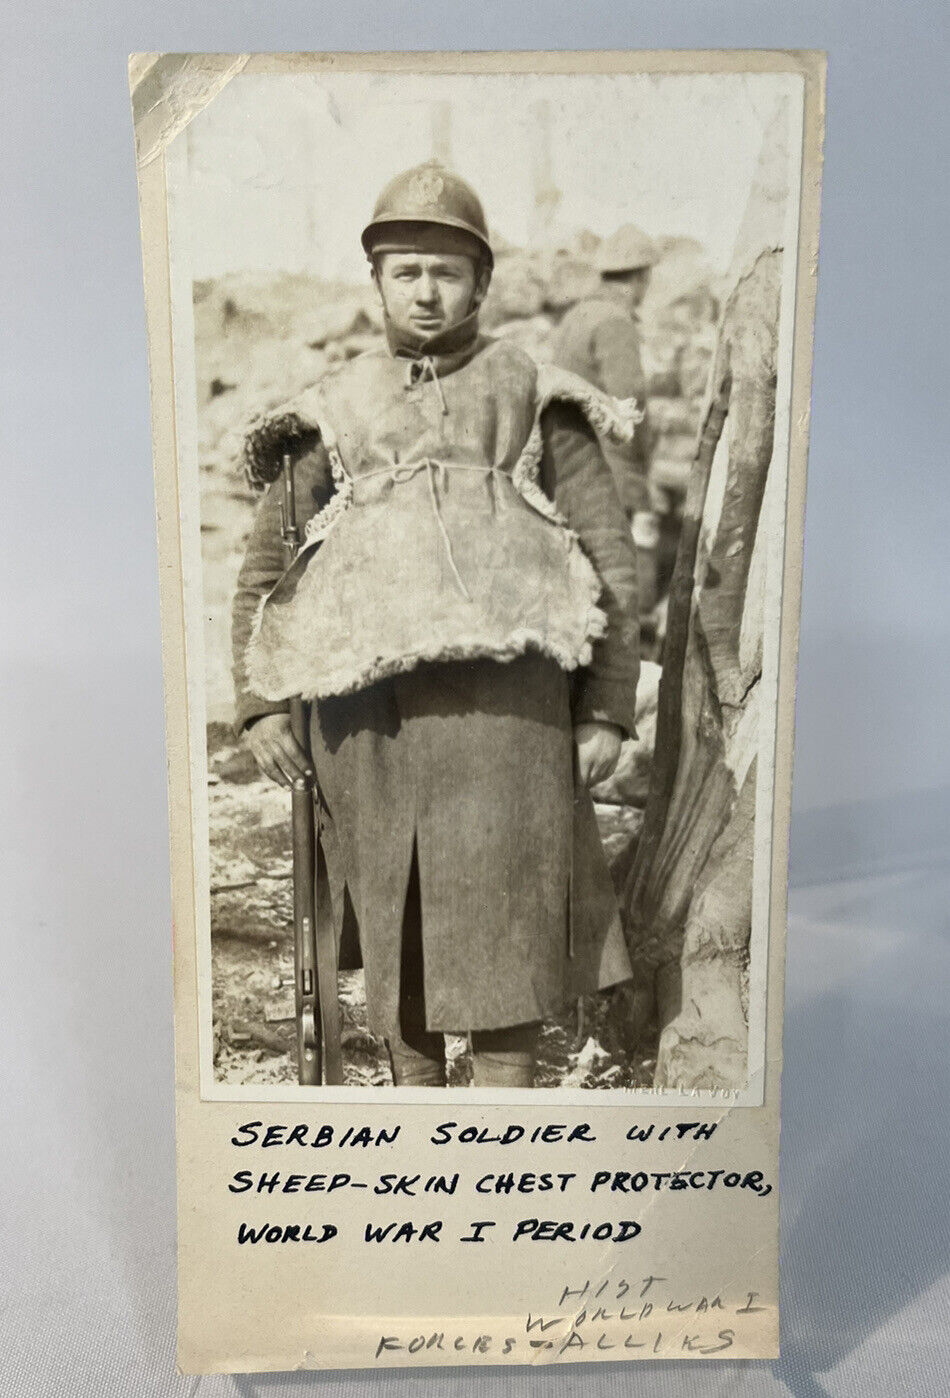 Vintage WWI Serbian Soldier with Sheep Skin Chest Protector, taken Merl la Voy